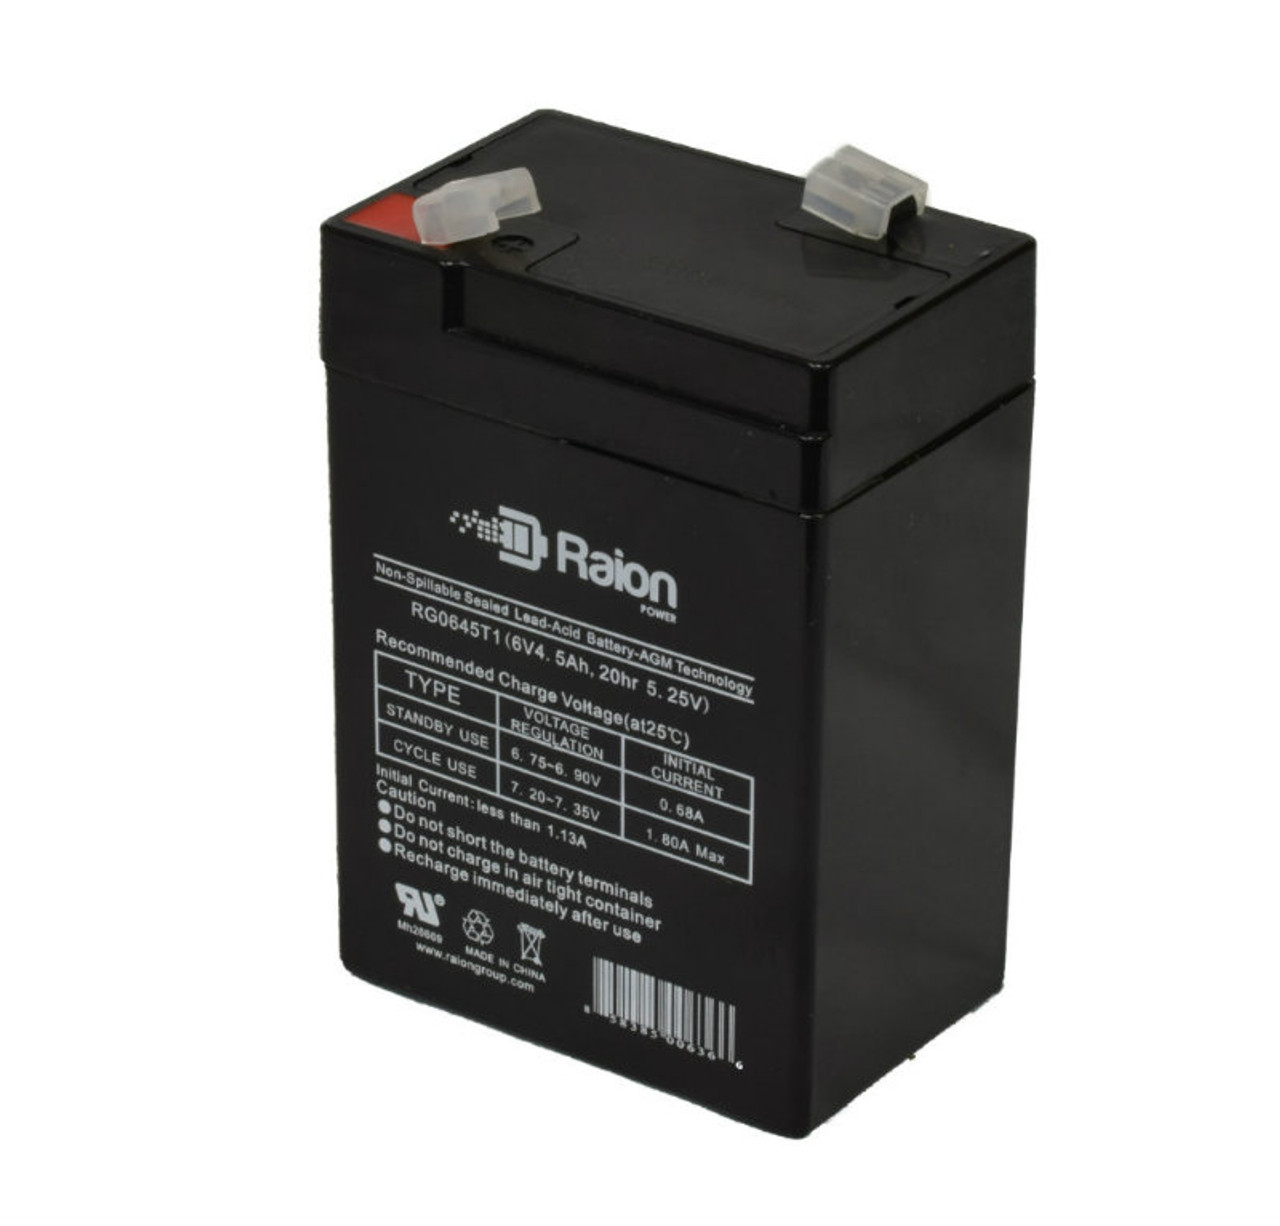 Raion Power RG0645T1 6V 4.5Ah Replacement Battery Cartridge for Sigma 4000 Infusion Pump